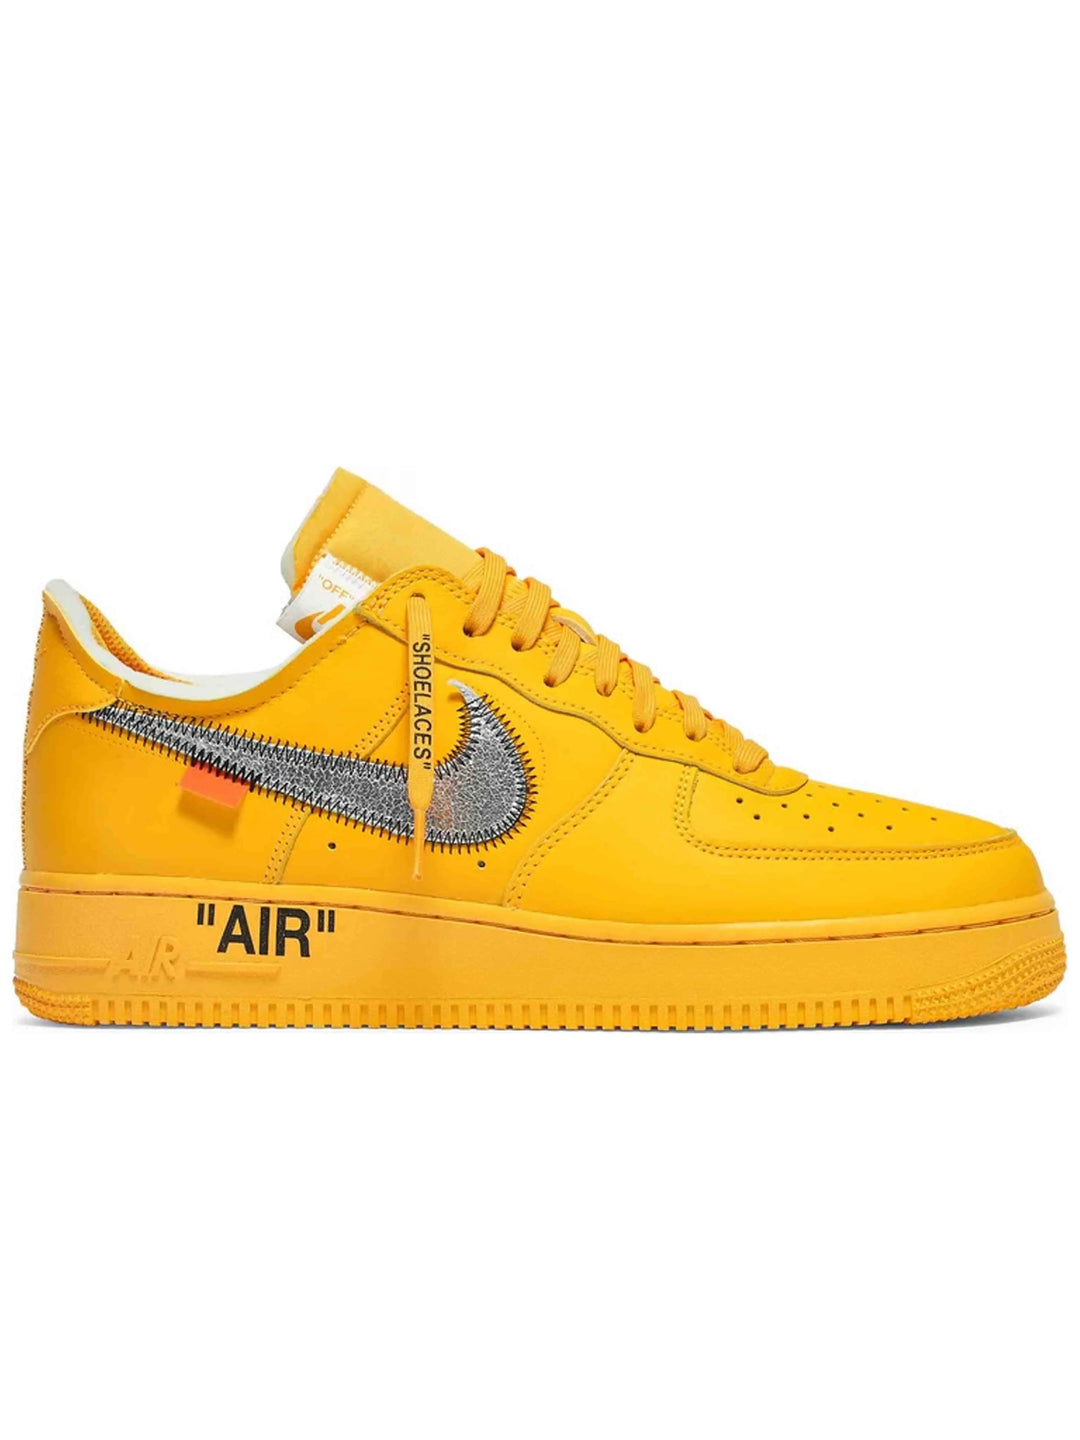 Nike X Off-White Air Force 1 Low ICA University Gold [2021] Prior